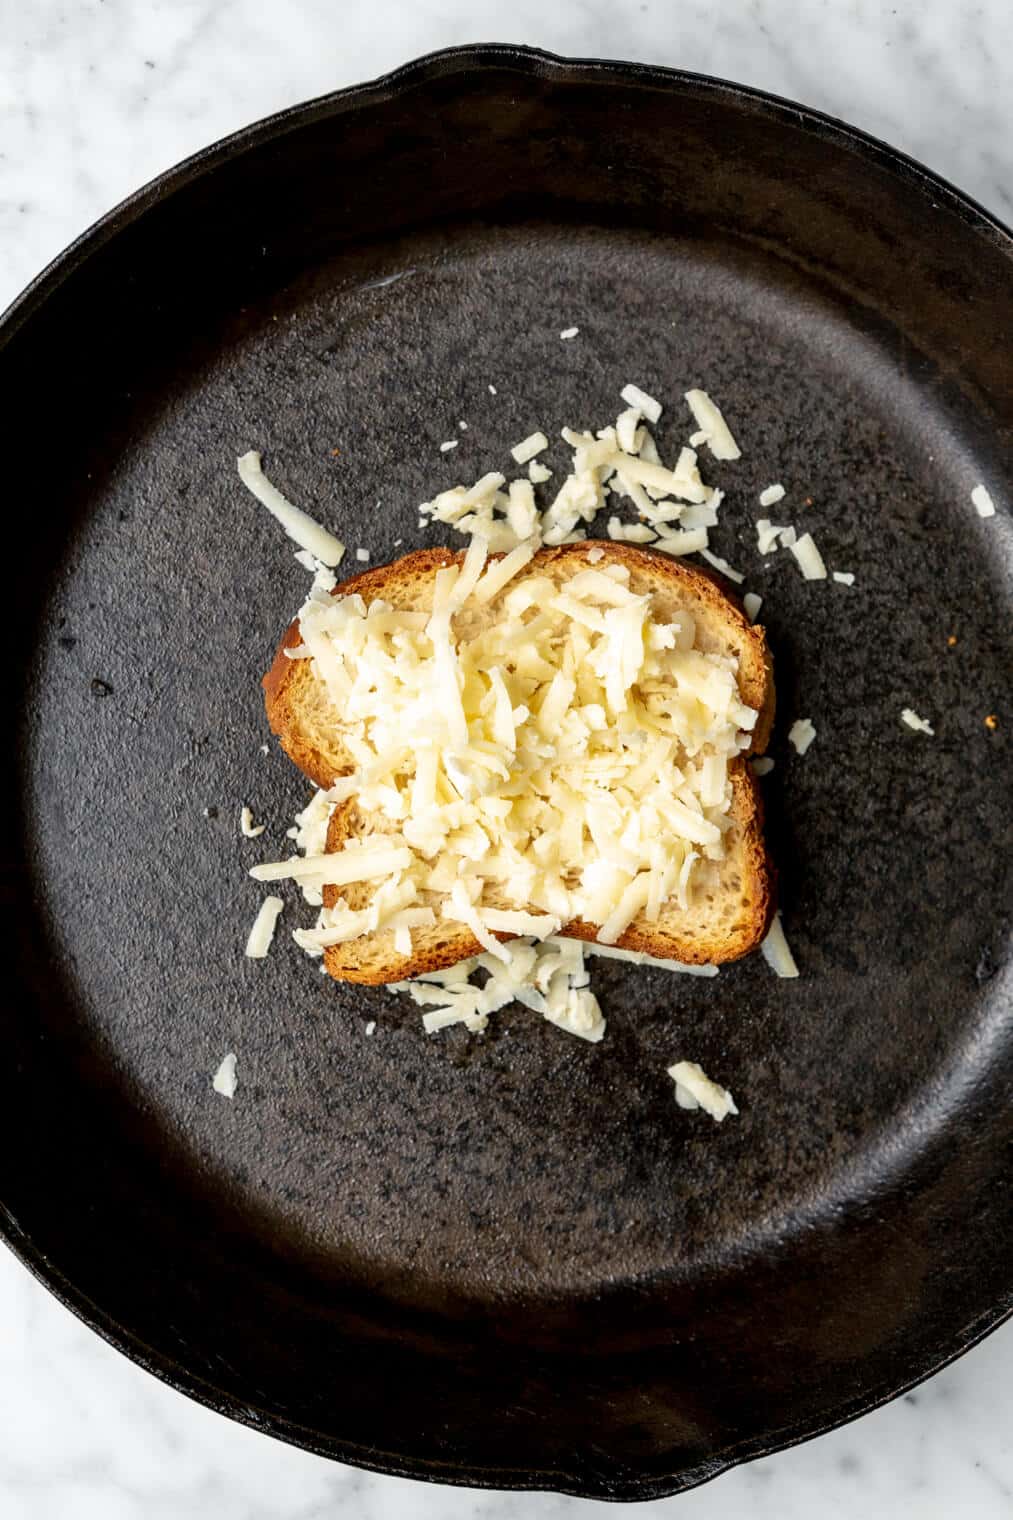 Shredded cheese on top of two slices of bread in cast iron pan.